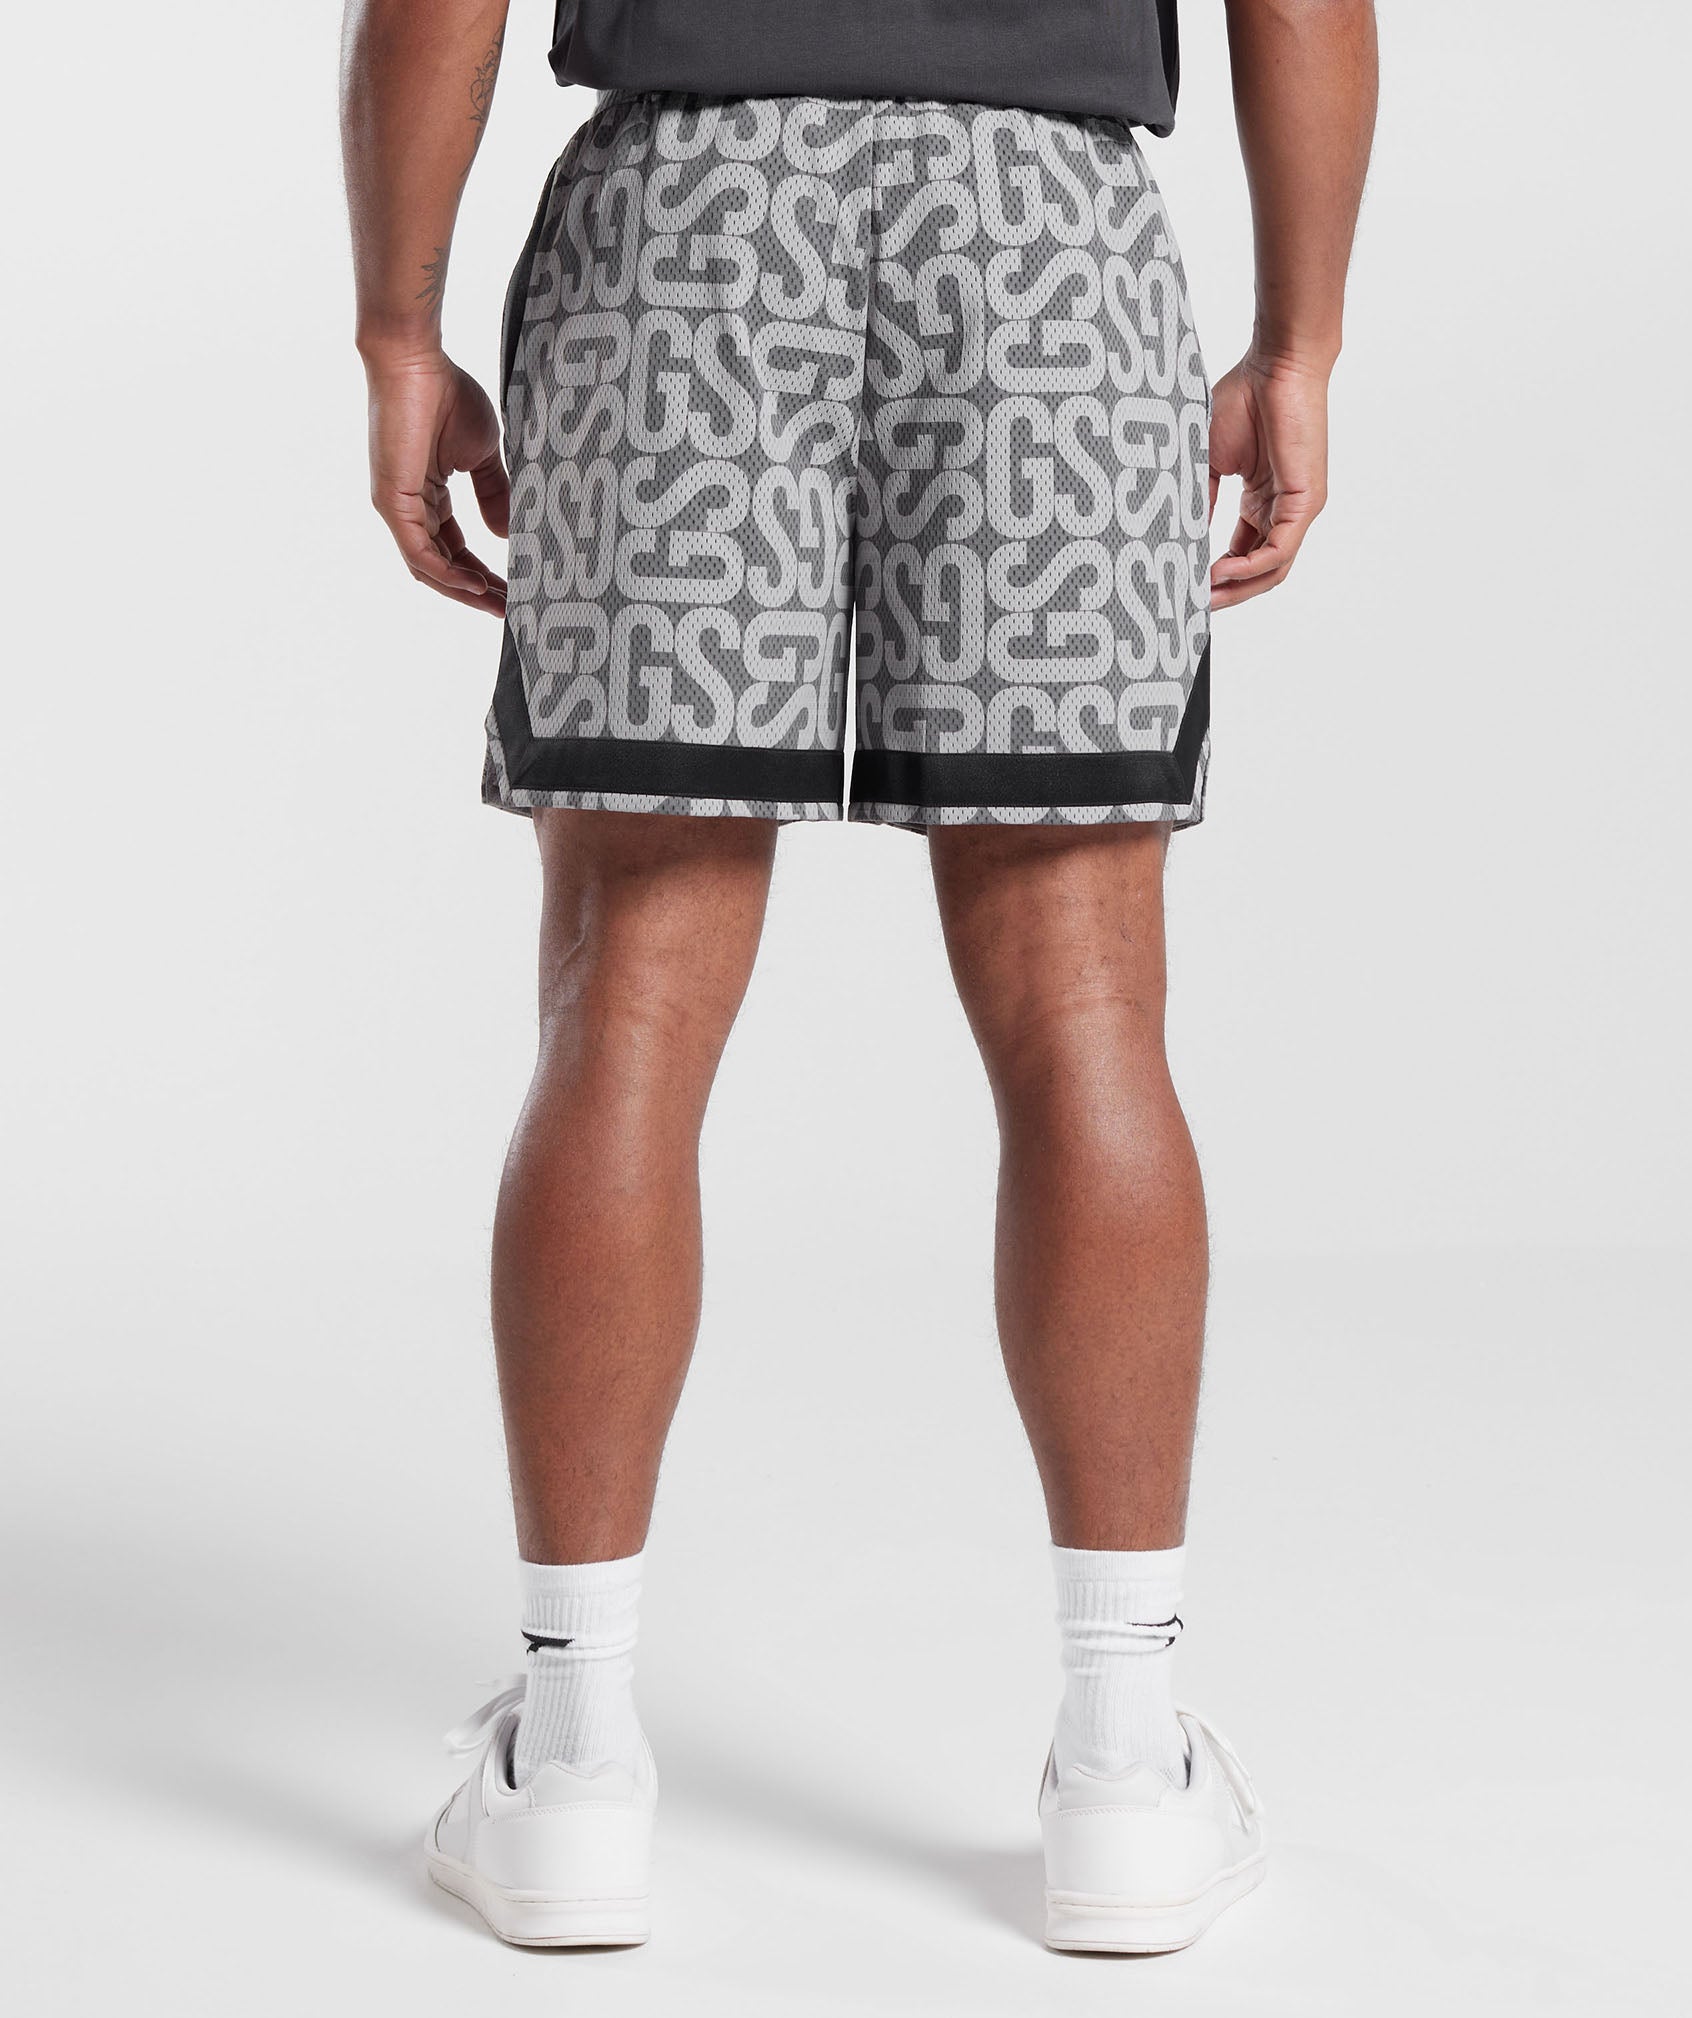 Rest Day Shorts in Smokey Grey - view 2